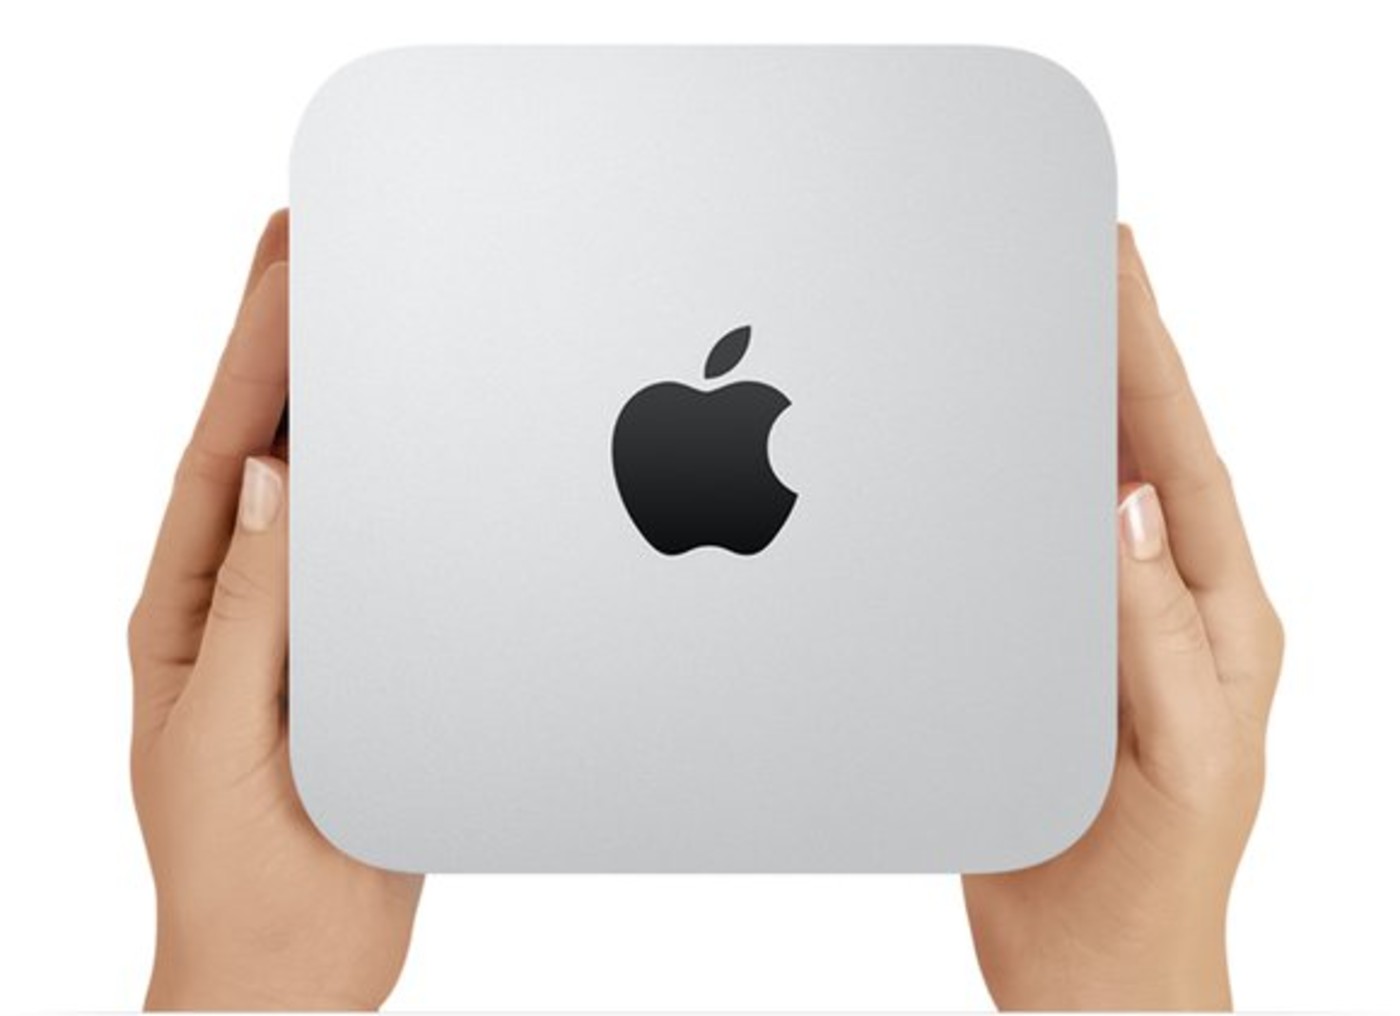 mac mini will not connect to internet for updates